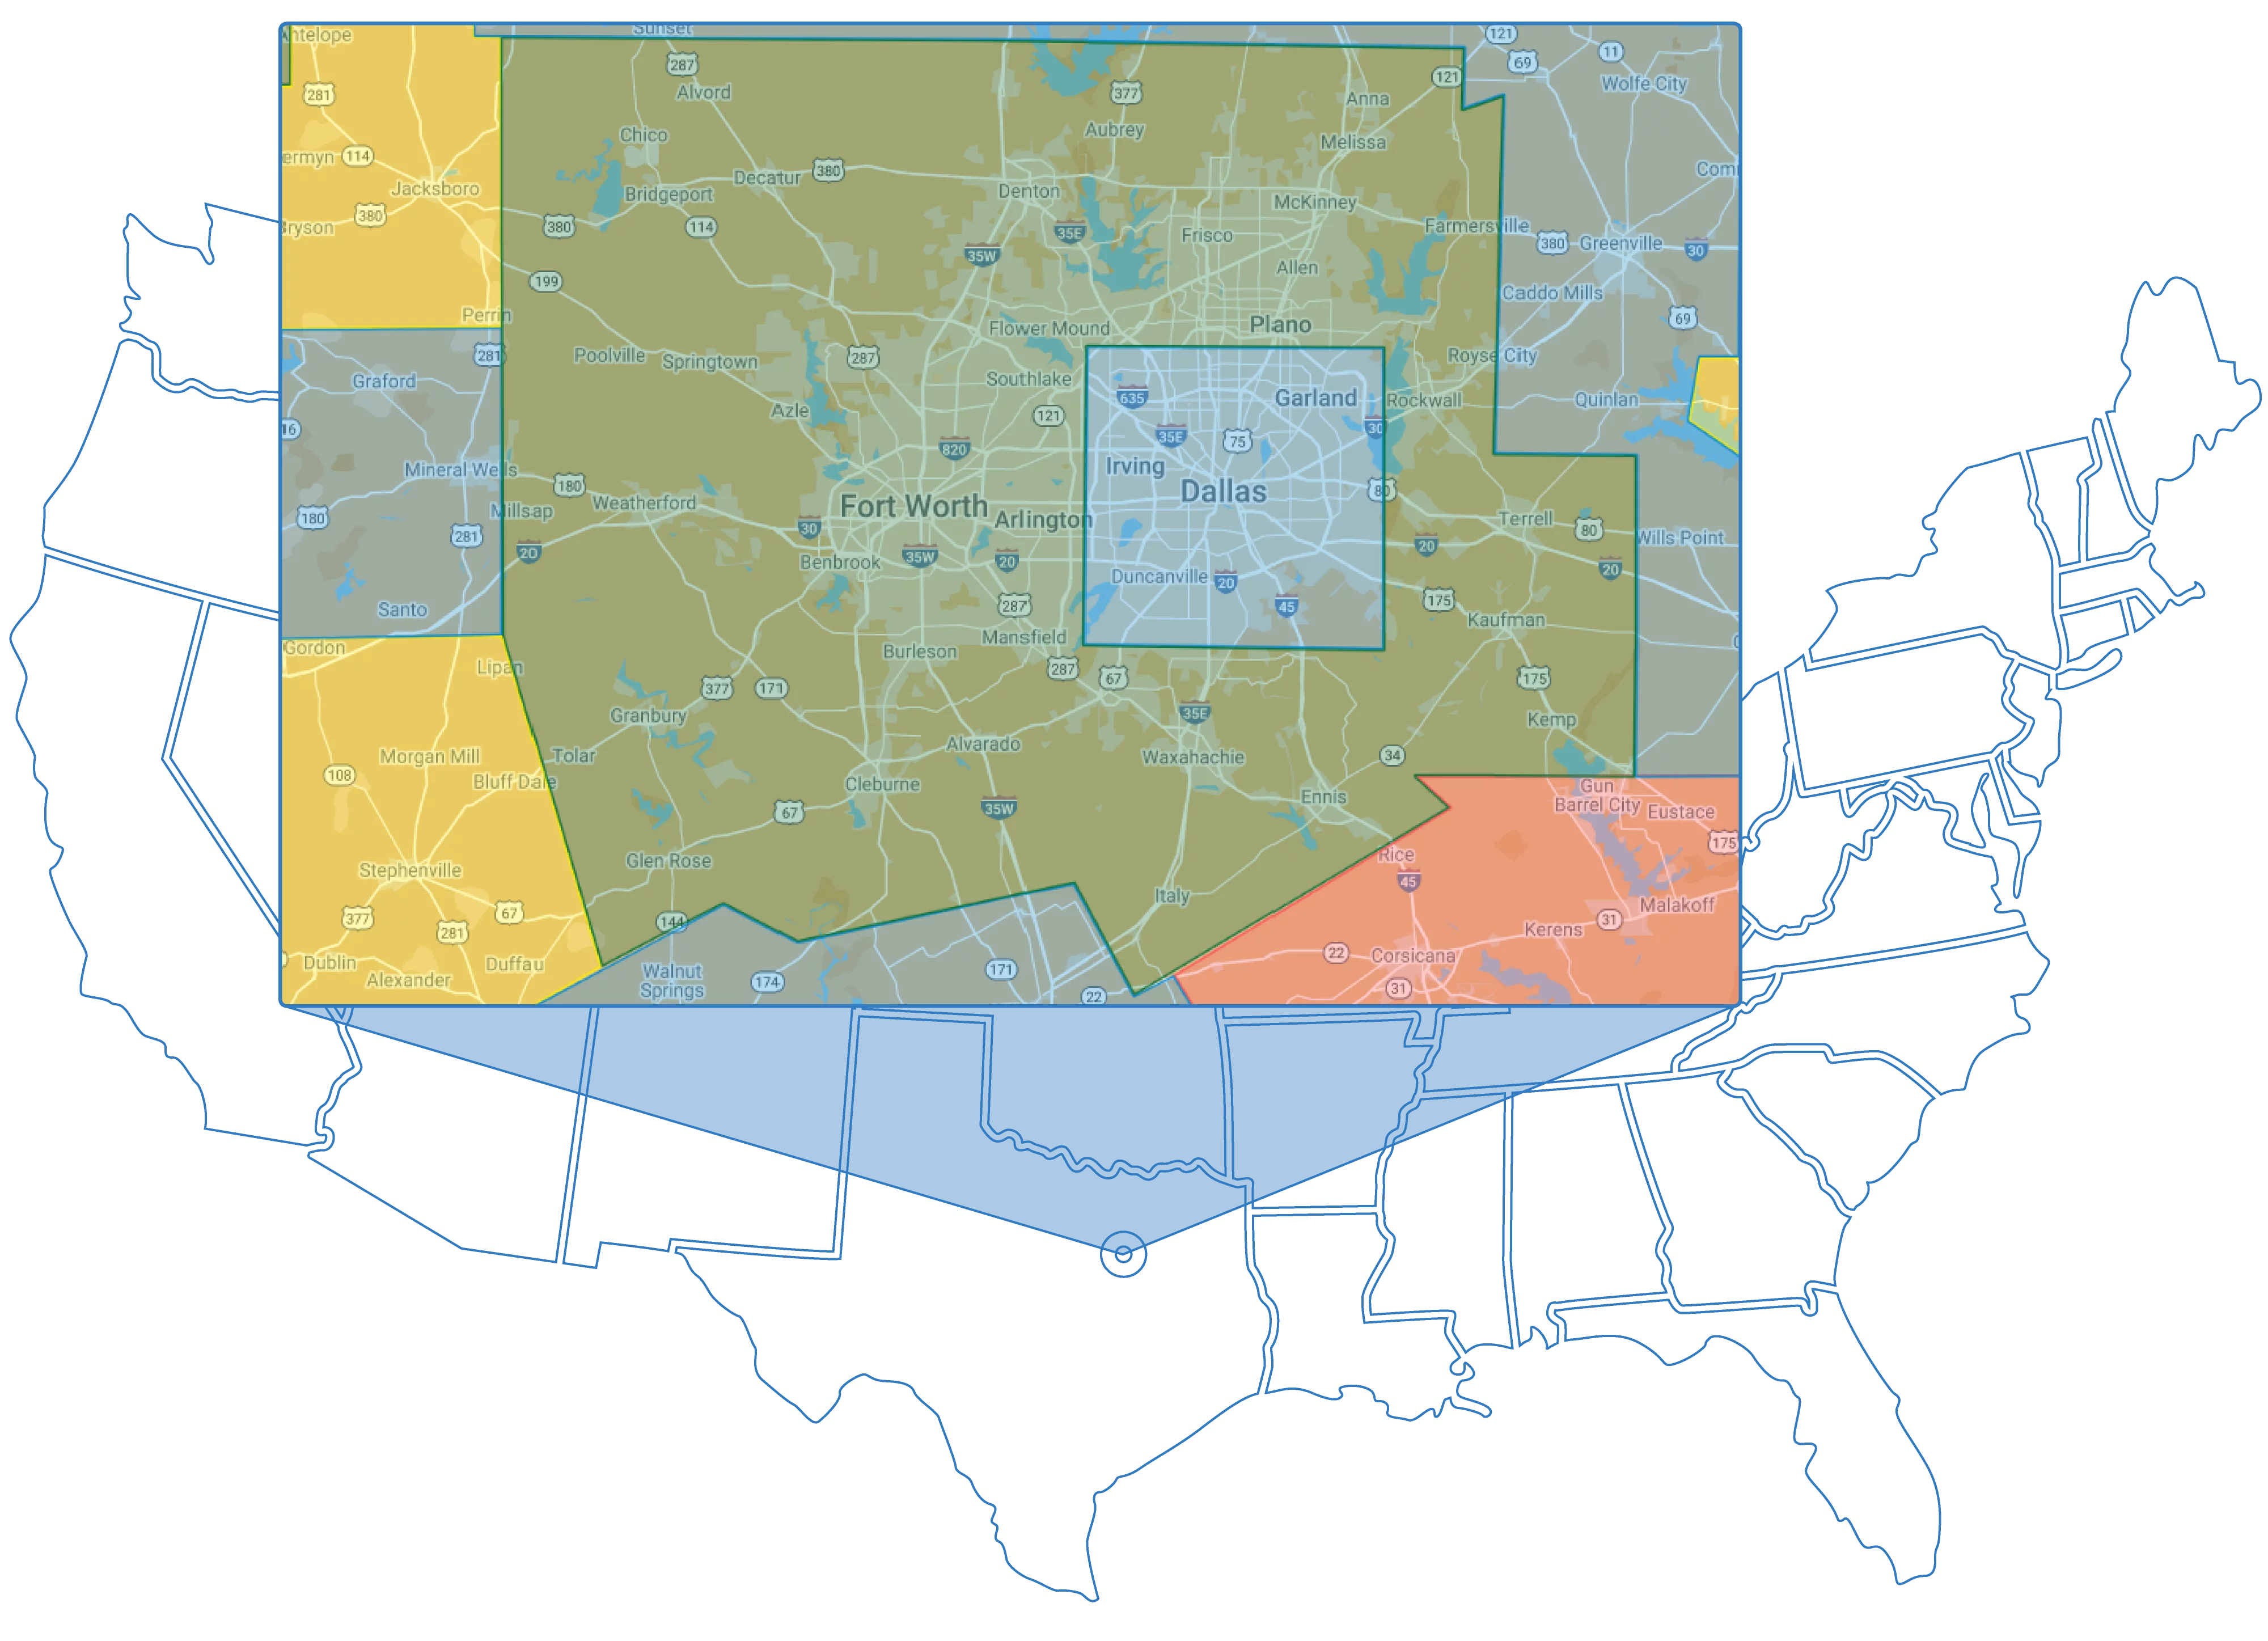 Map of the Greater Dallas-Ft. Worth area, color coded by household income levels. Data Source: Google Maps, U.S. Census, Bureau of Labor Statistics.